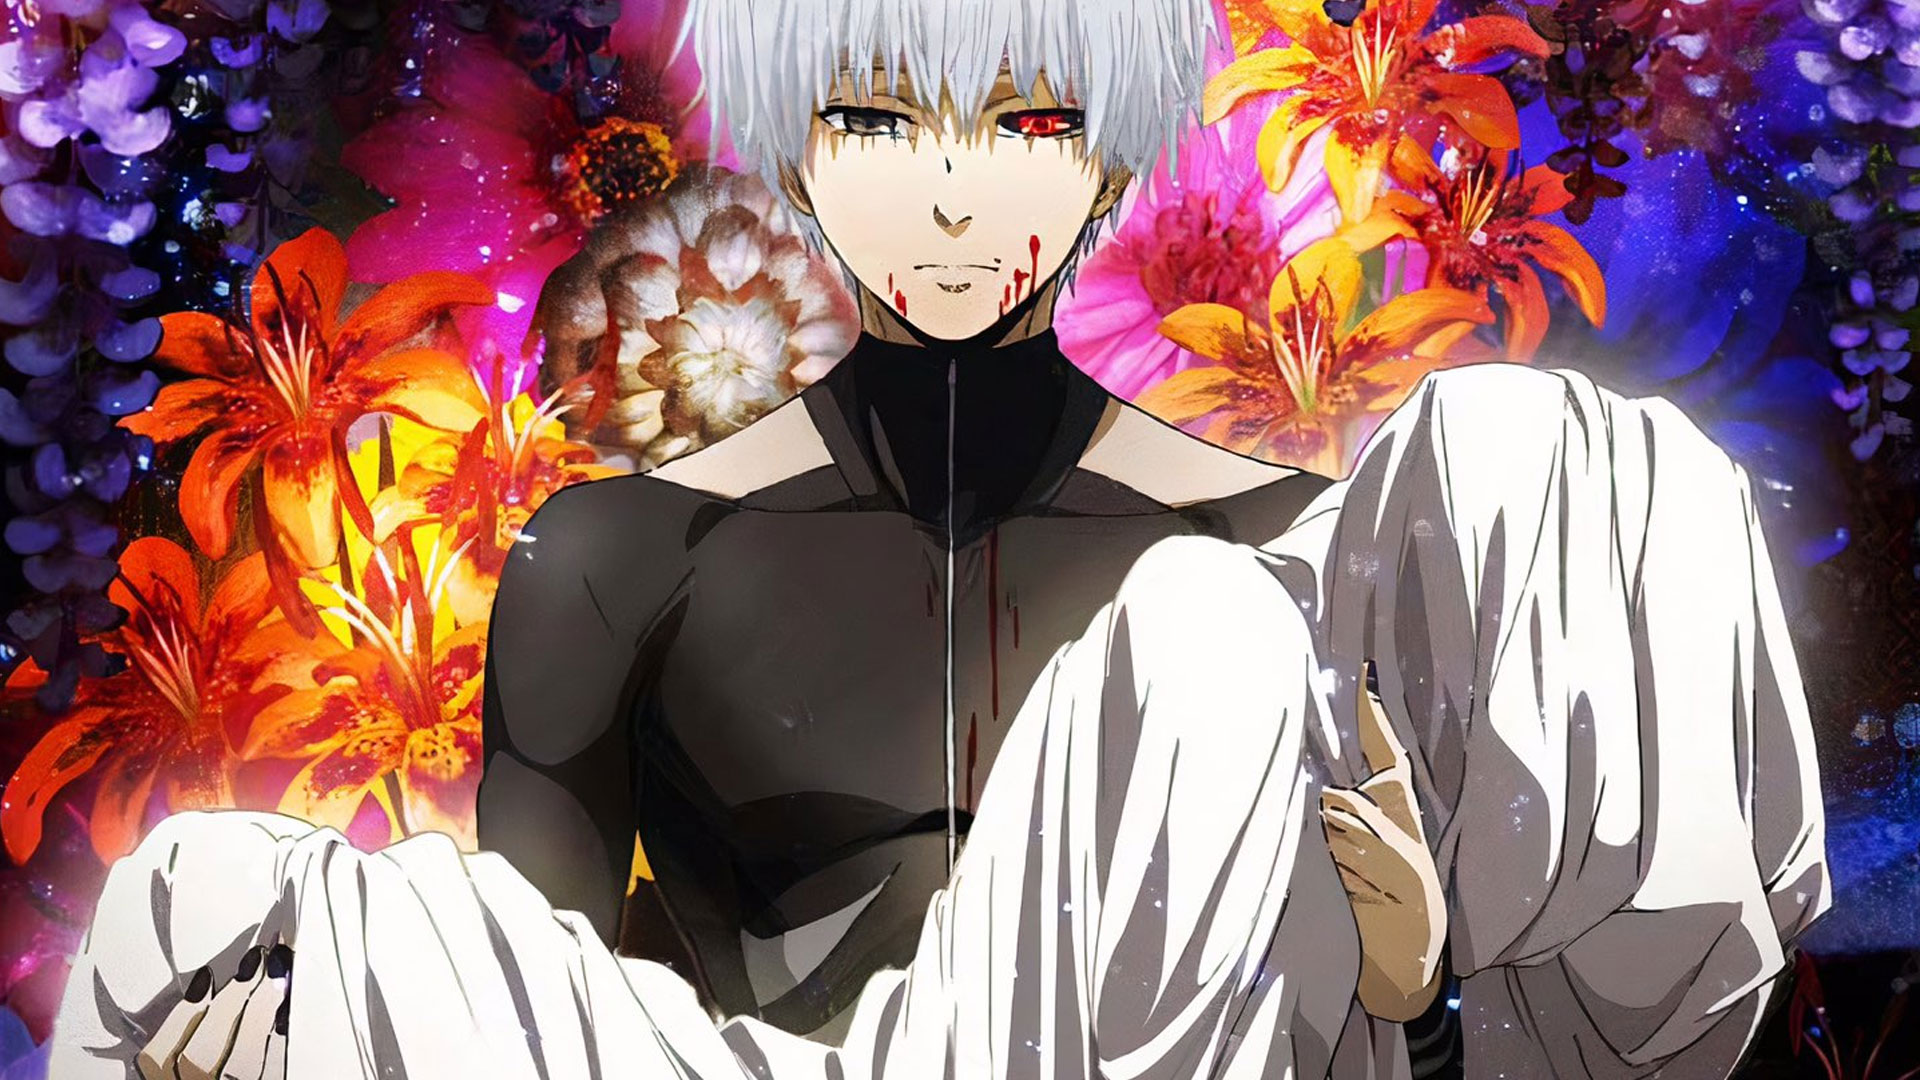 Tokyo Ghoul Rumored to Have Special Anime Episode